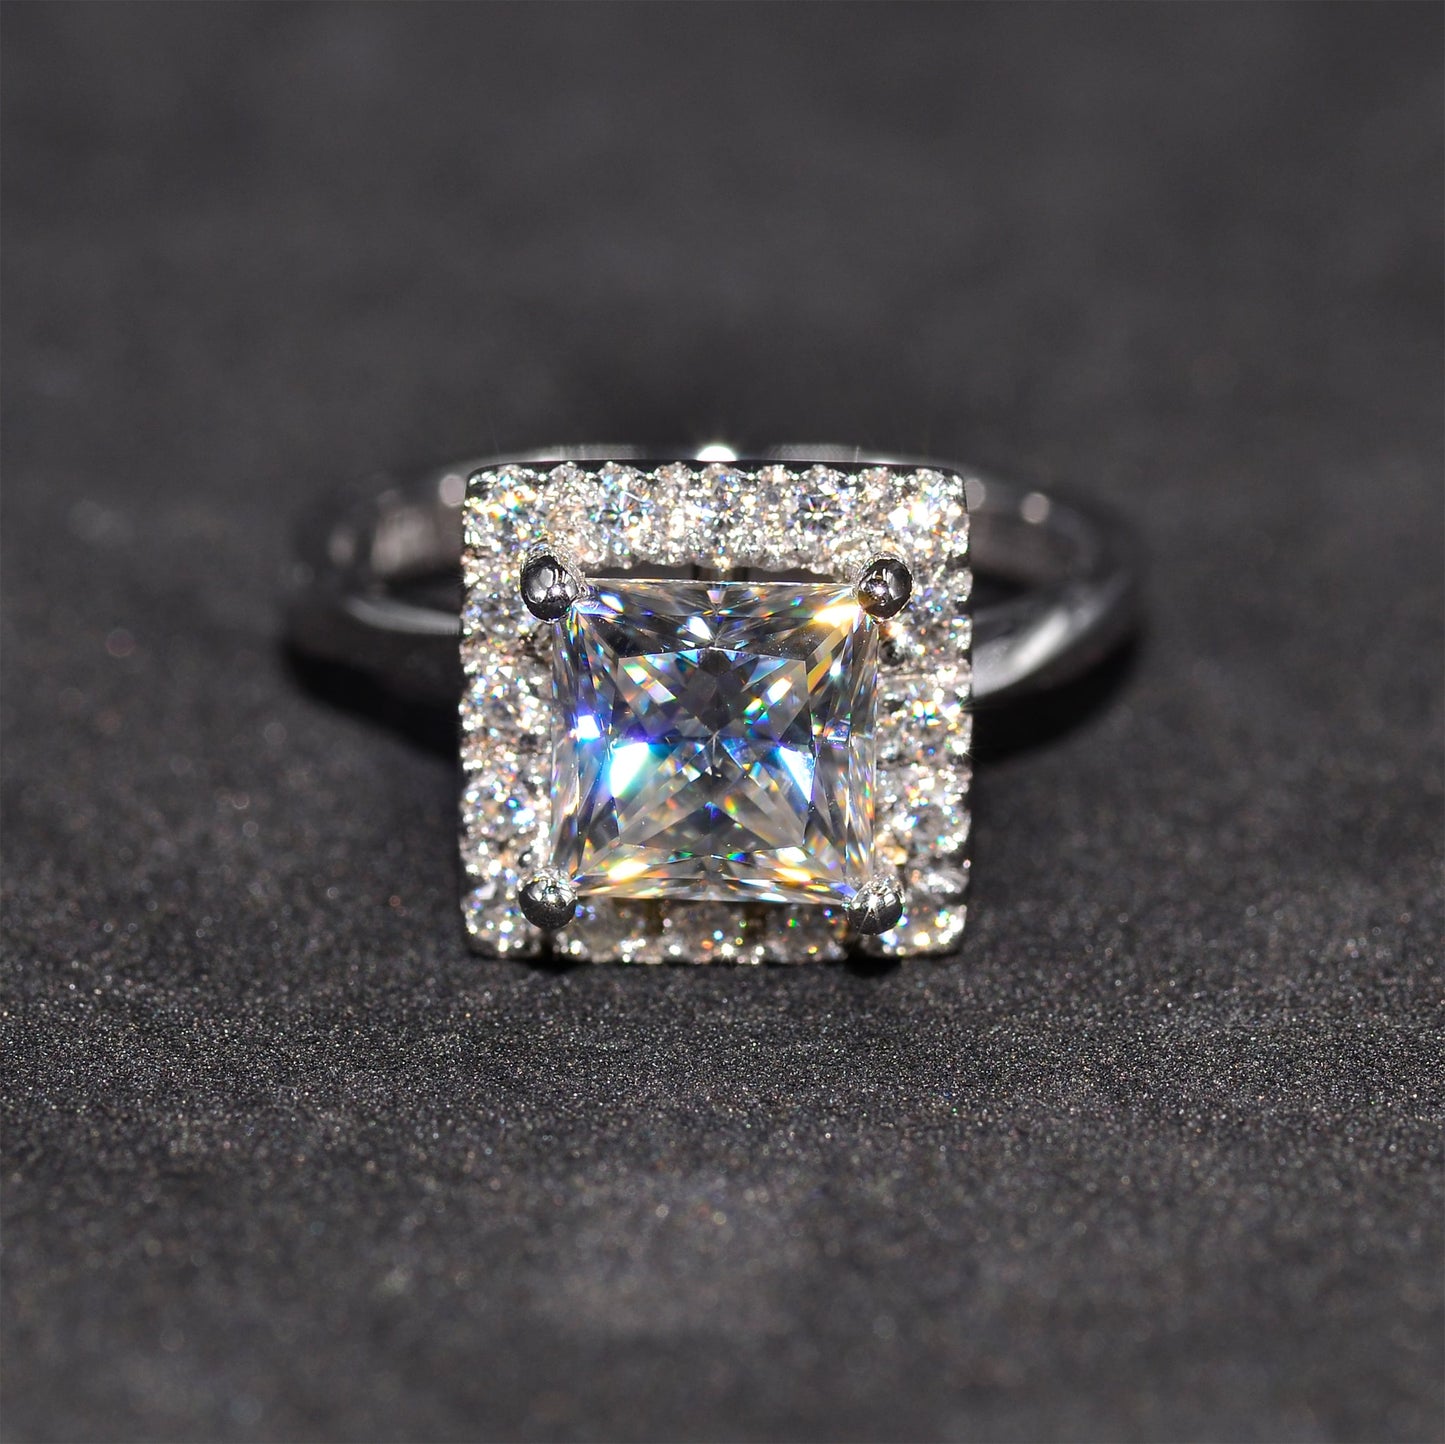 Stunning custom made engagement ring with moissanites